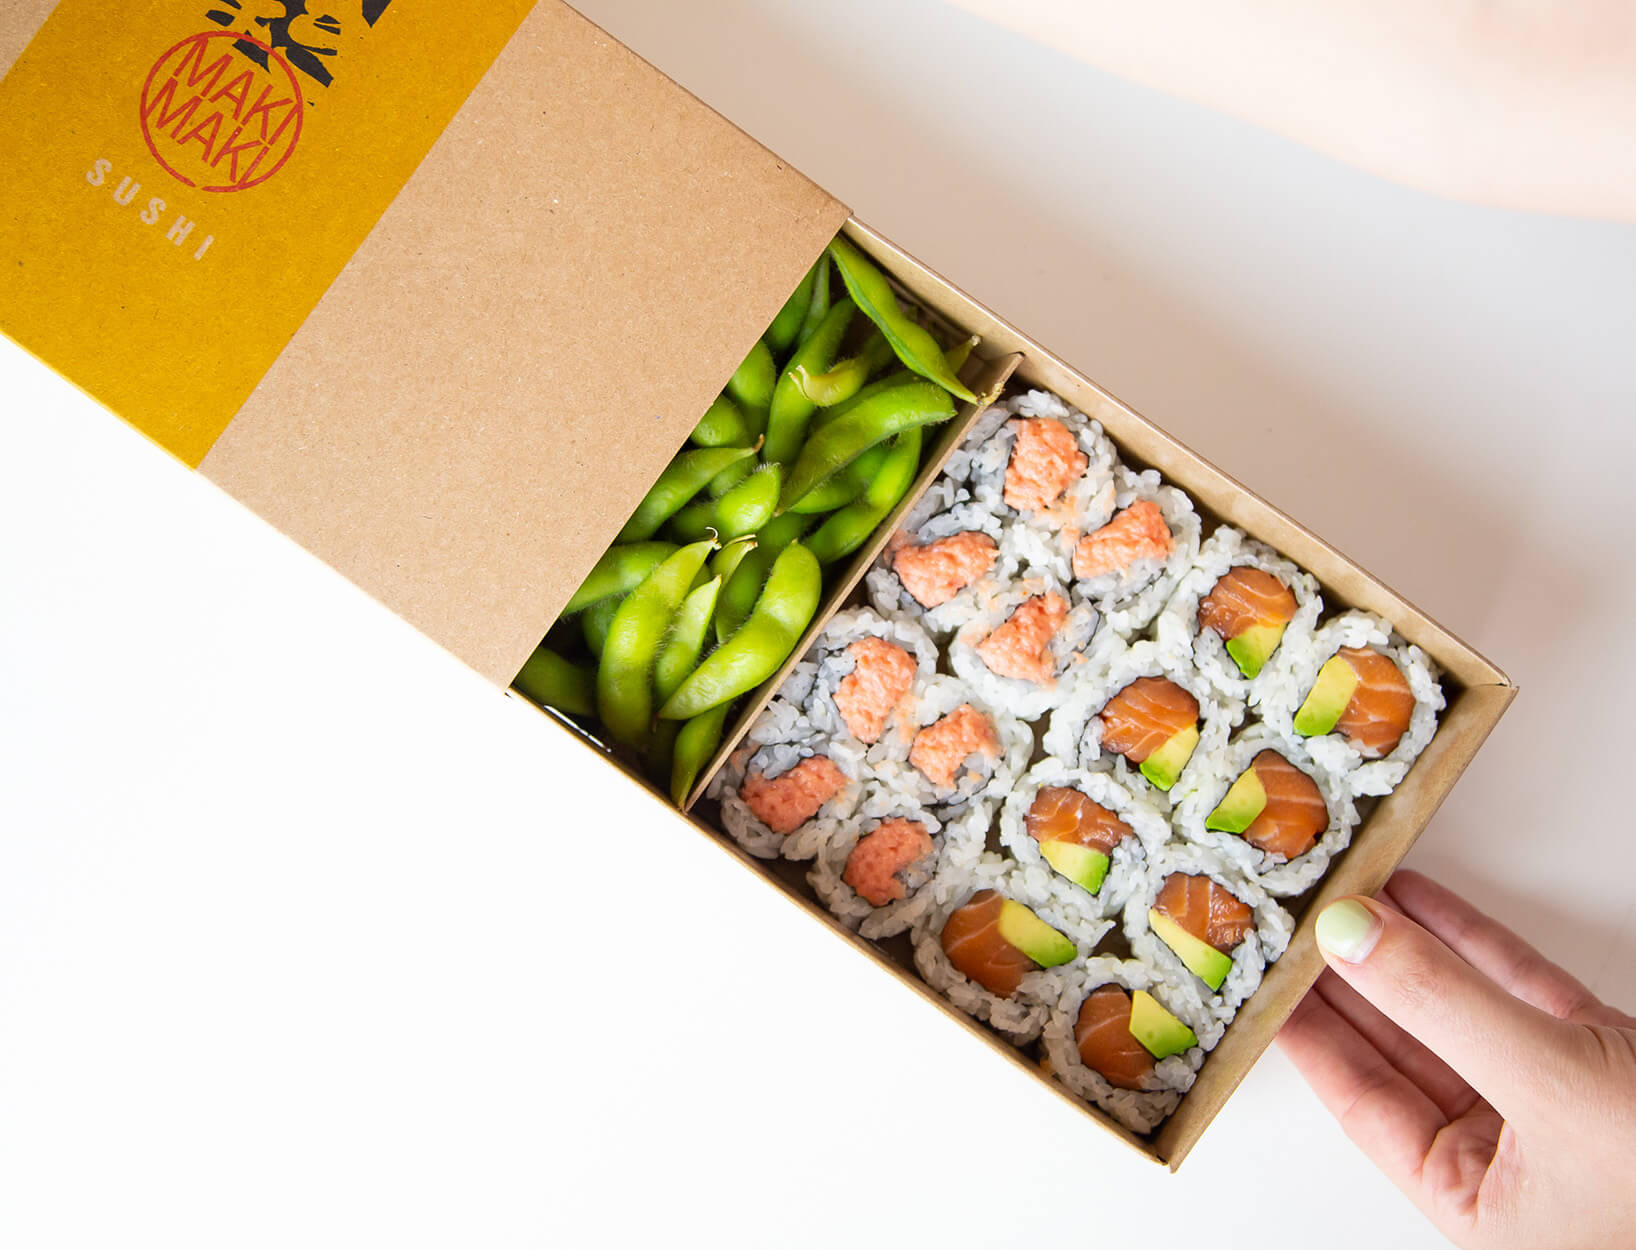 A modernly designed brown sushi takeout box is filled with two types of rolls and edamame.